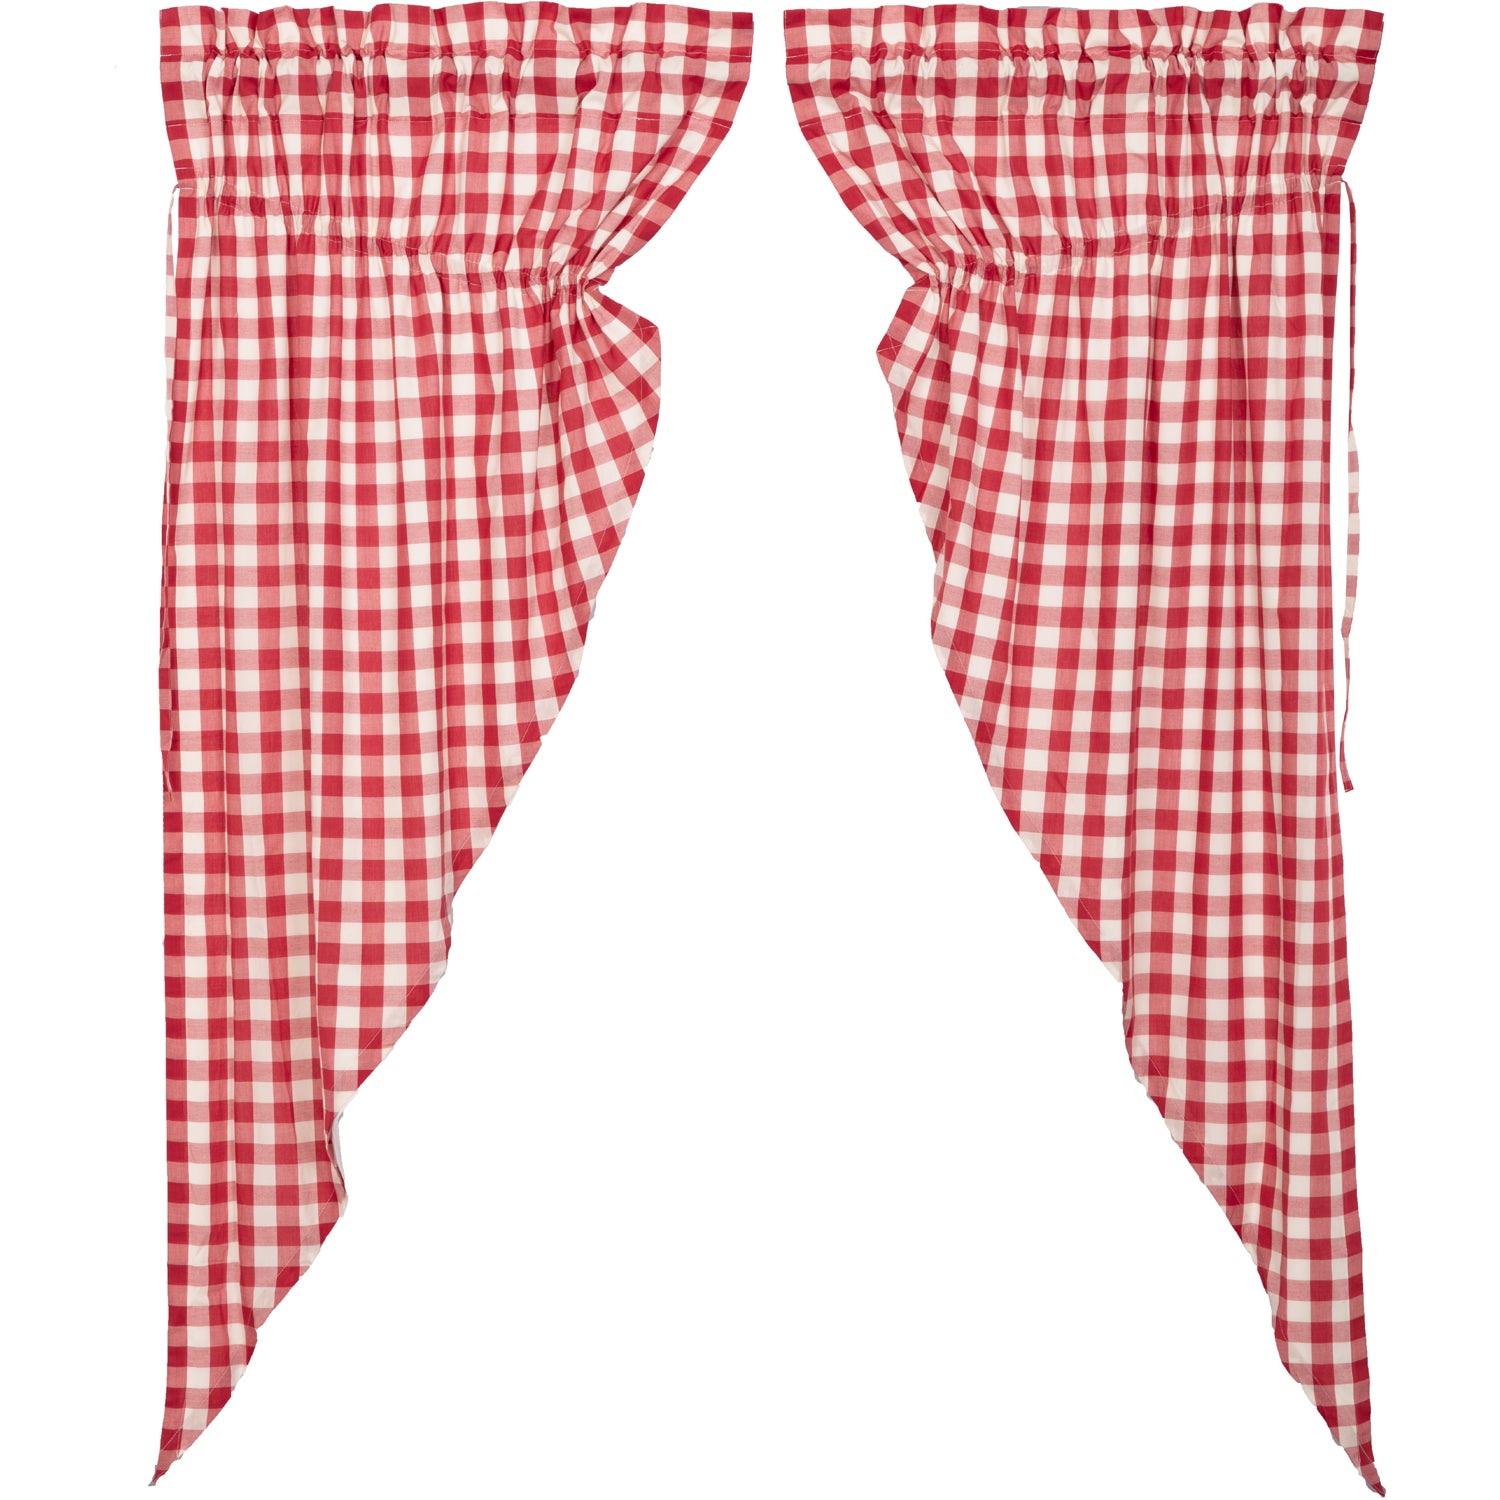 April & Olive Annie Buffalo Red Check Prairie Short Panel Set of 2 63x36x18 By VHC Brands